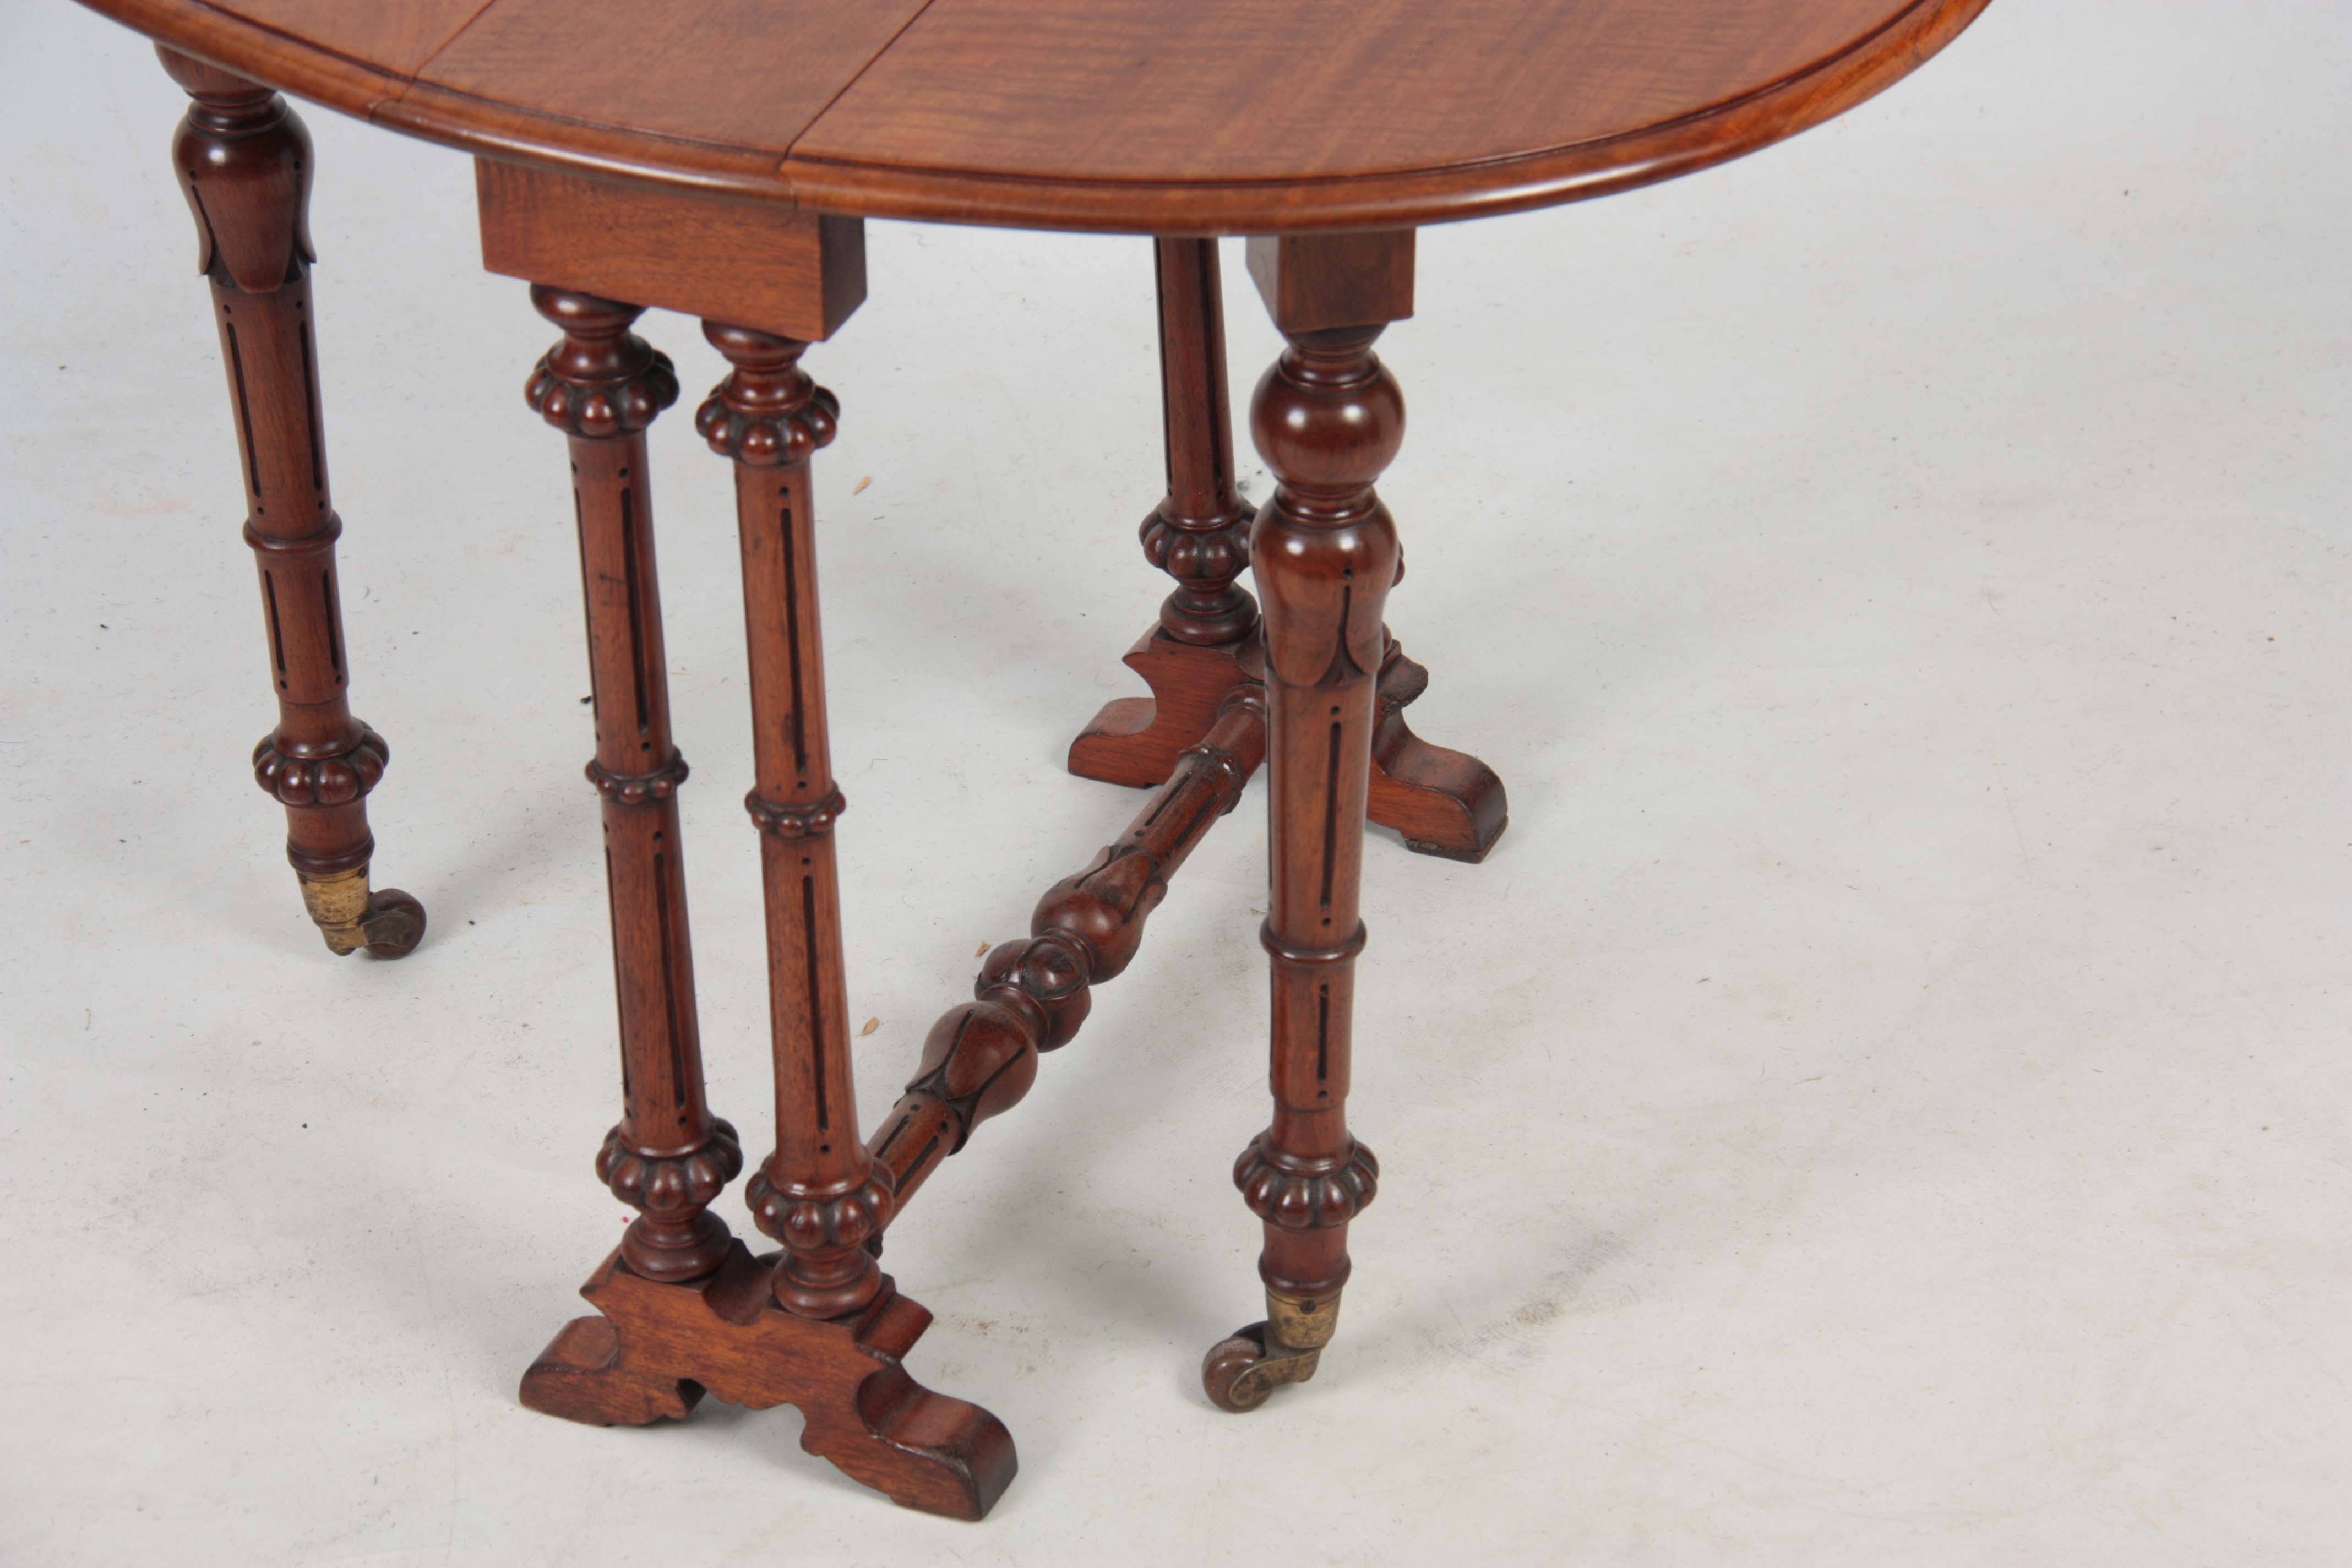 A 19TH CENTURY WALNUT MINIATURE SUTHERLAND TABLE with moulded edge oval top above a turned base with - Image 7 of 7